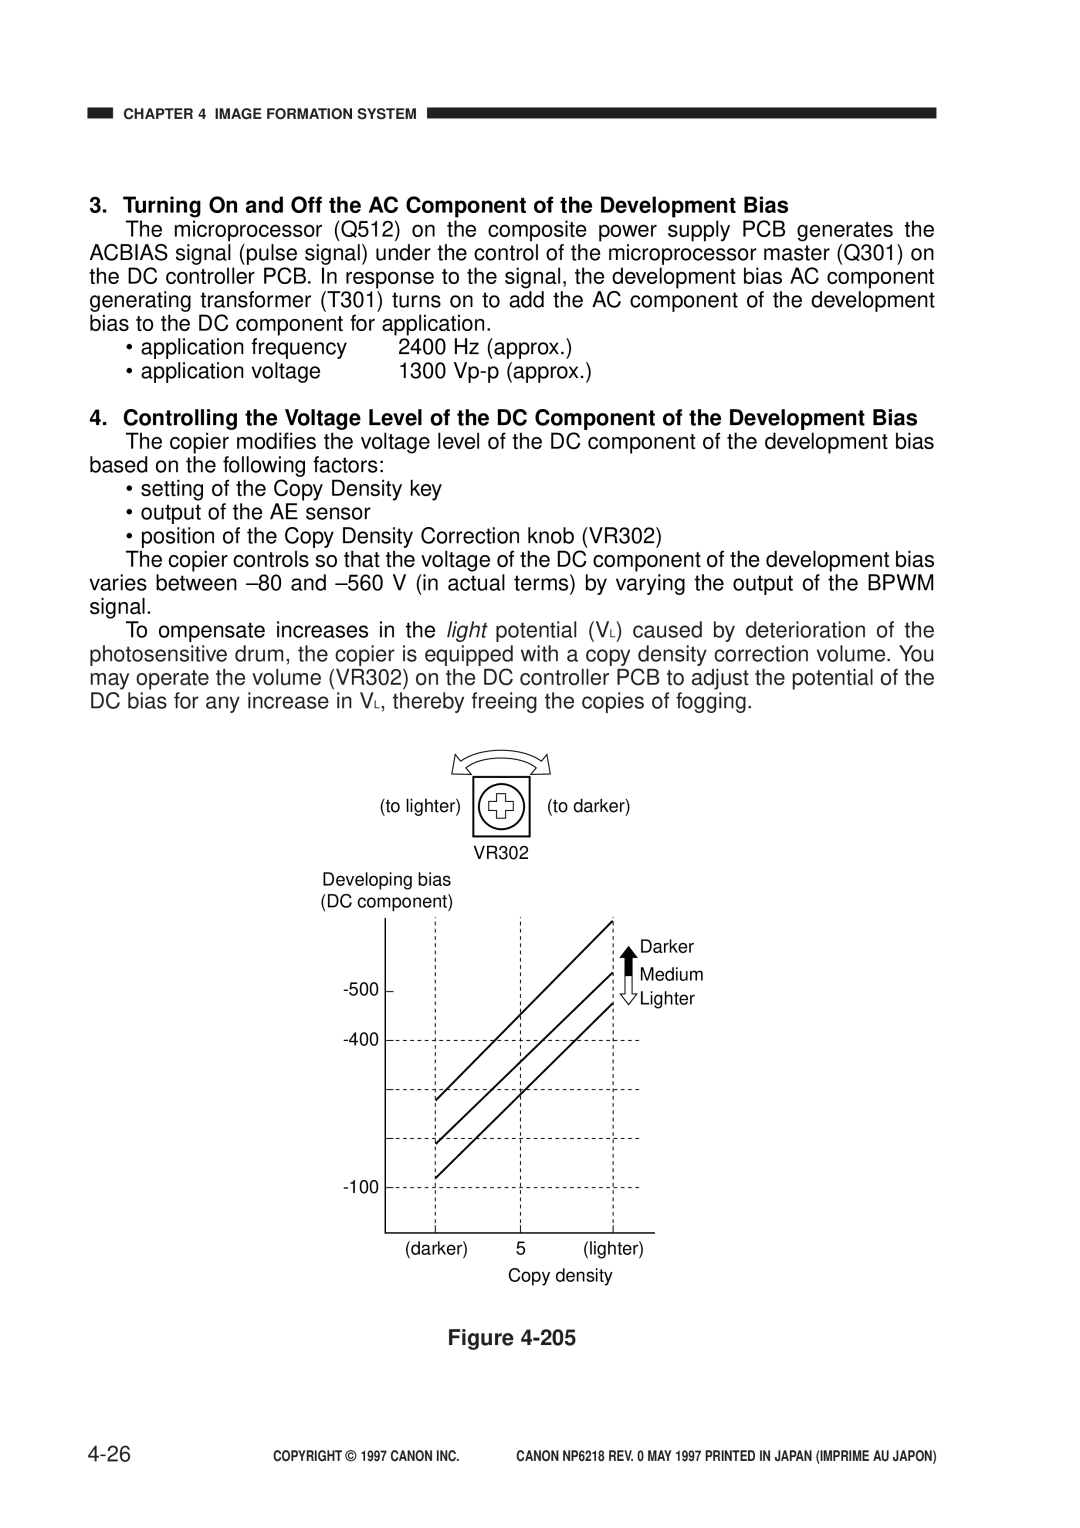 Canon NP6218, FY8-13EX-000 service manual Turning On and Off the AC Component of the Development Bias, 4-26 